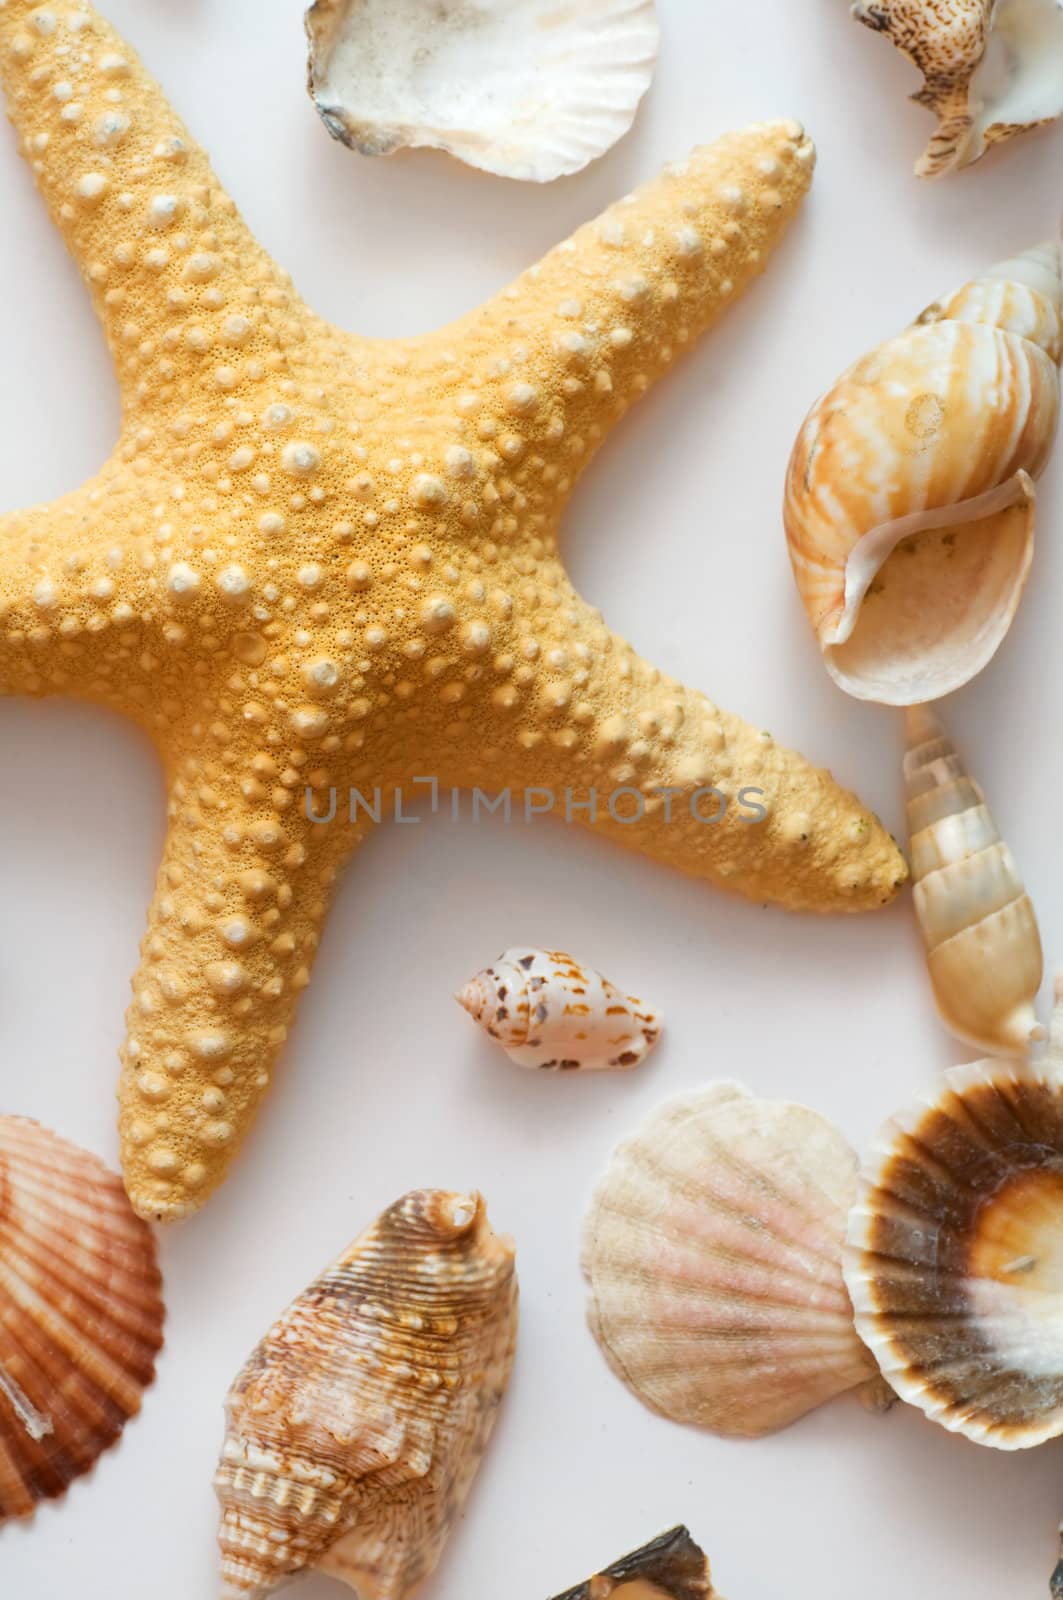 Starfish and shells by photocreo